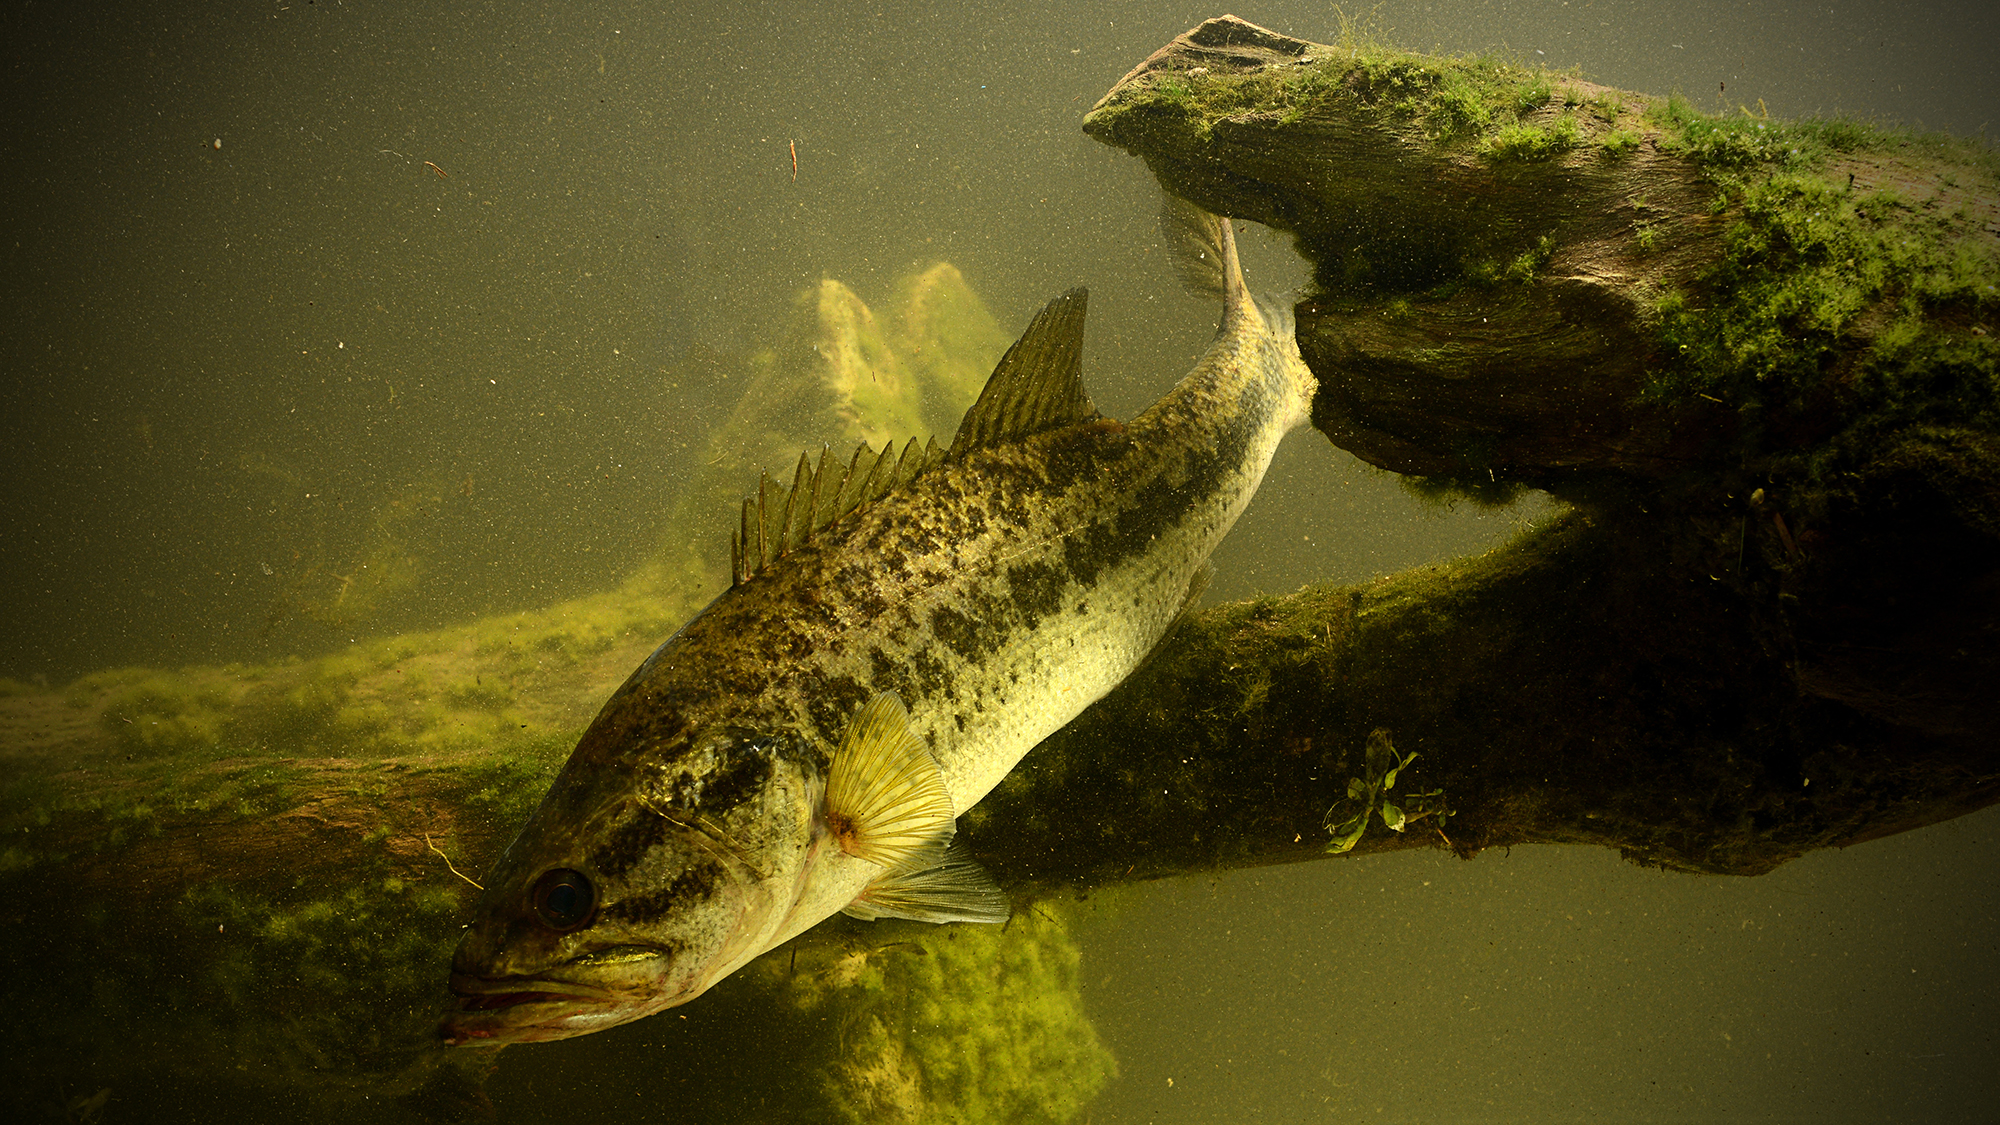 “PFAS in freshwater fish is at such a concentration that for anyone consuming, even infrequently, it would likely be their major source of exposure over the course of the year."